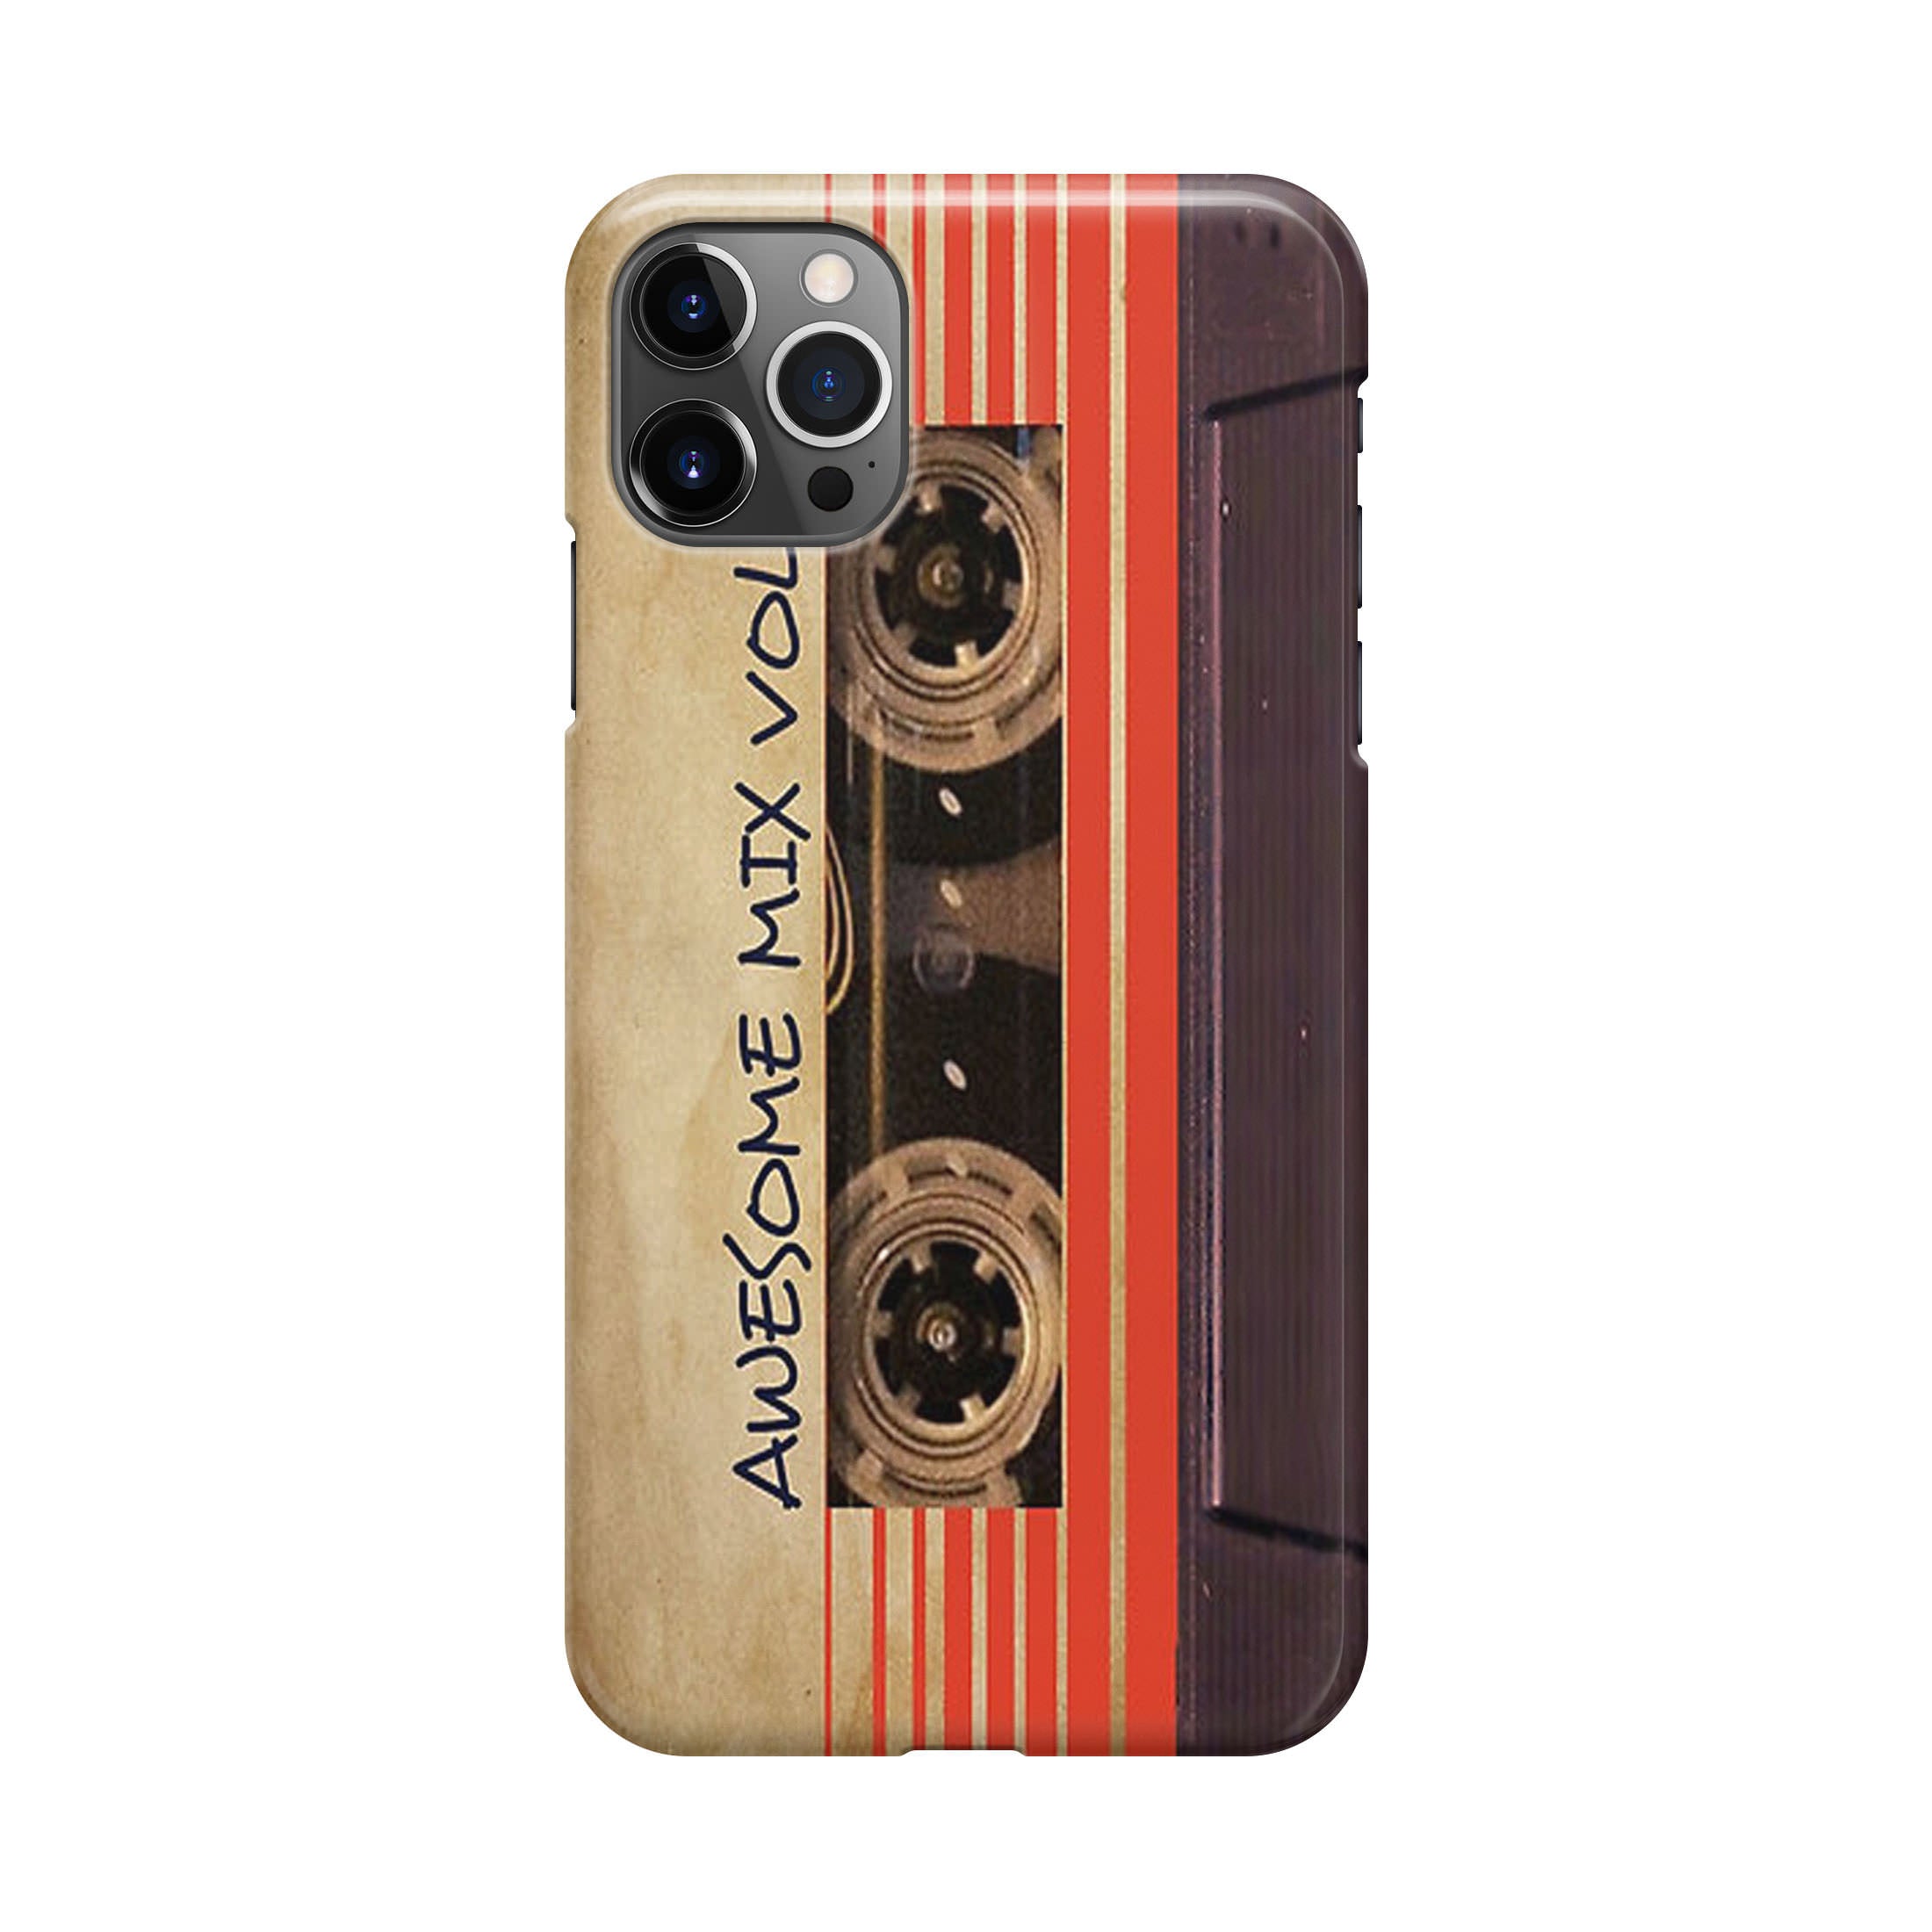 Awesome Mix Vol 1 Cassette iPhone 12 Pro Max Case – Customilo